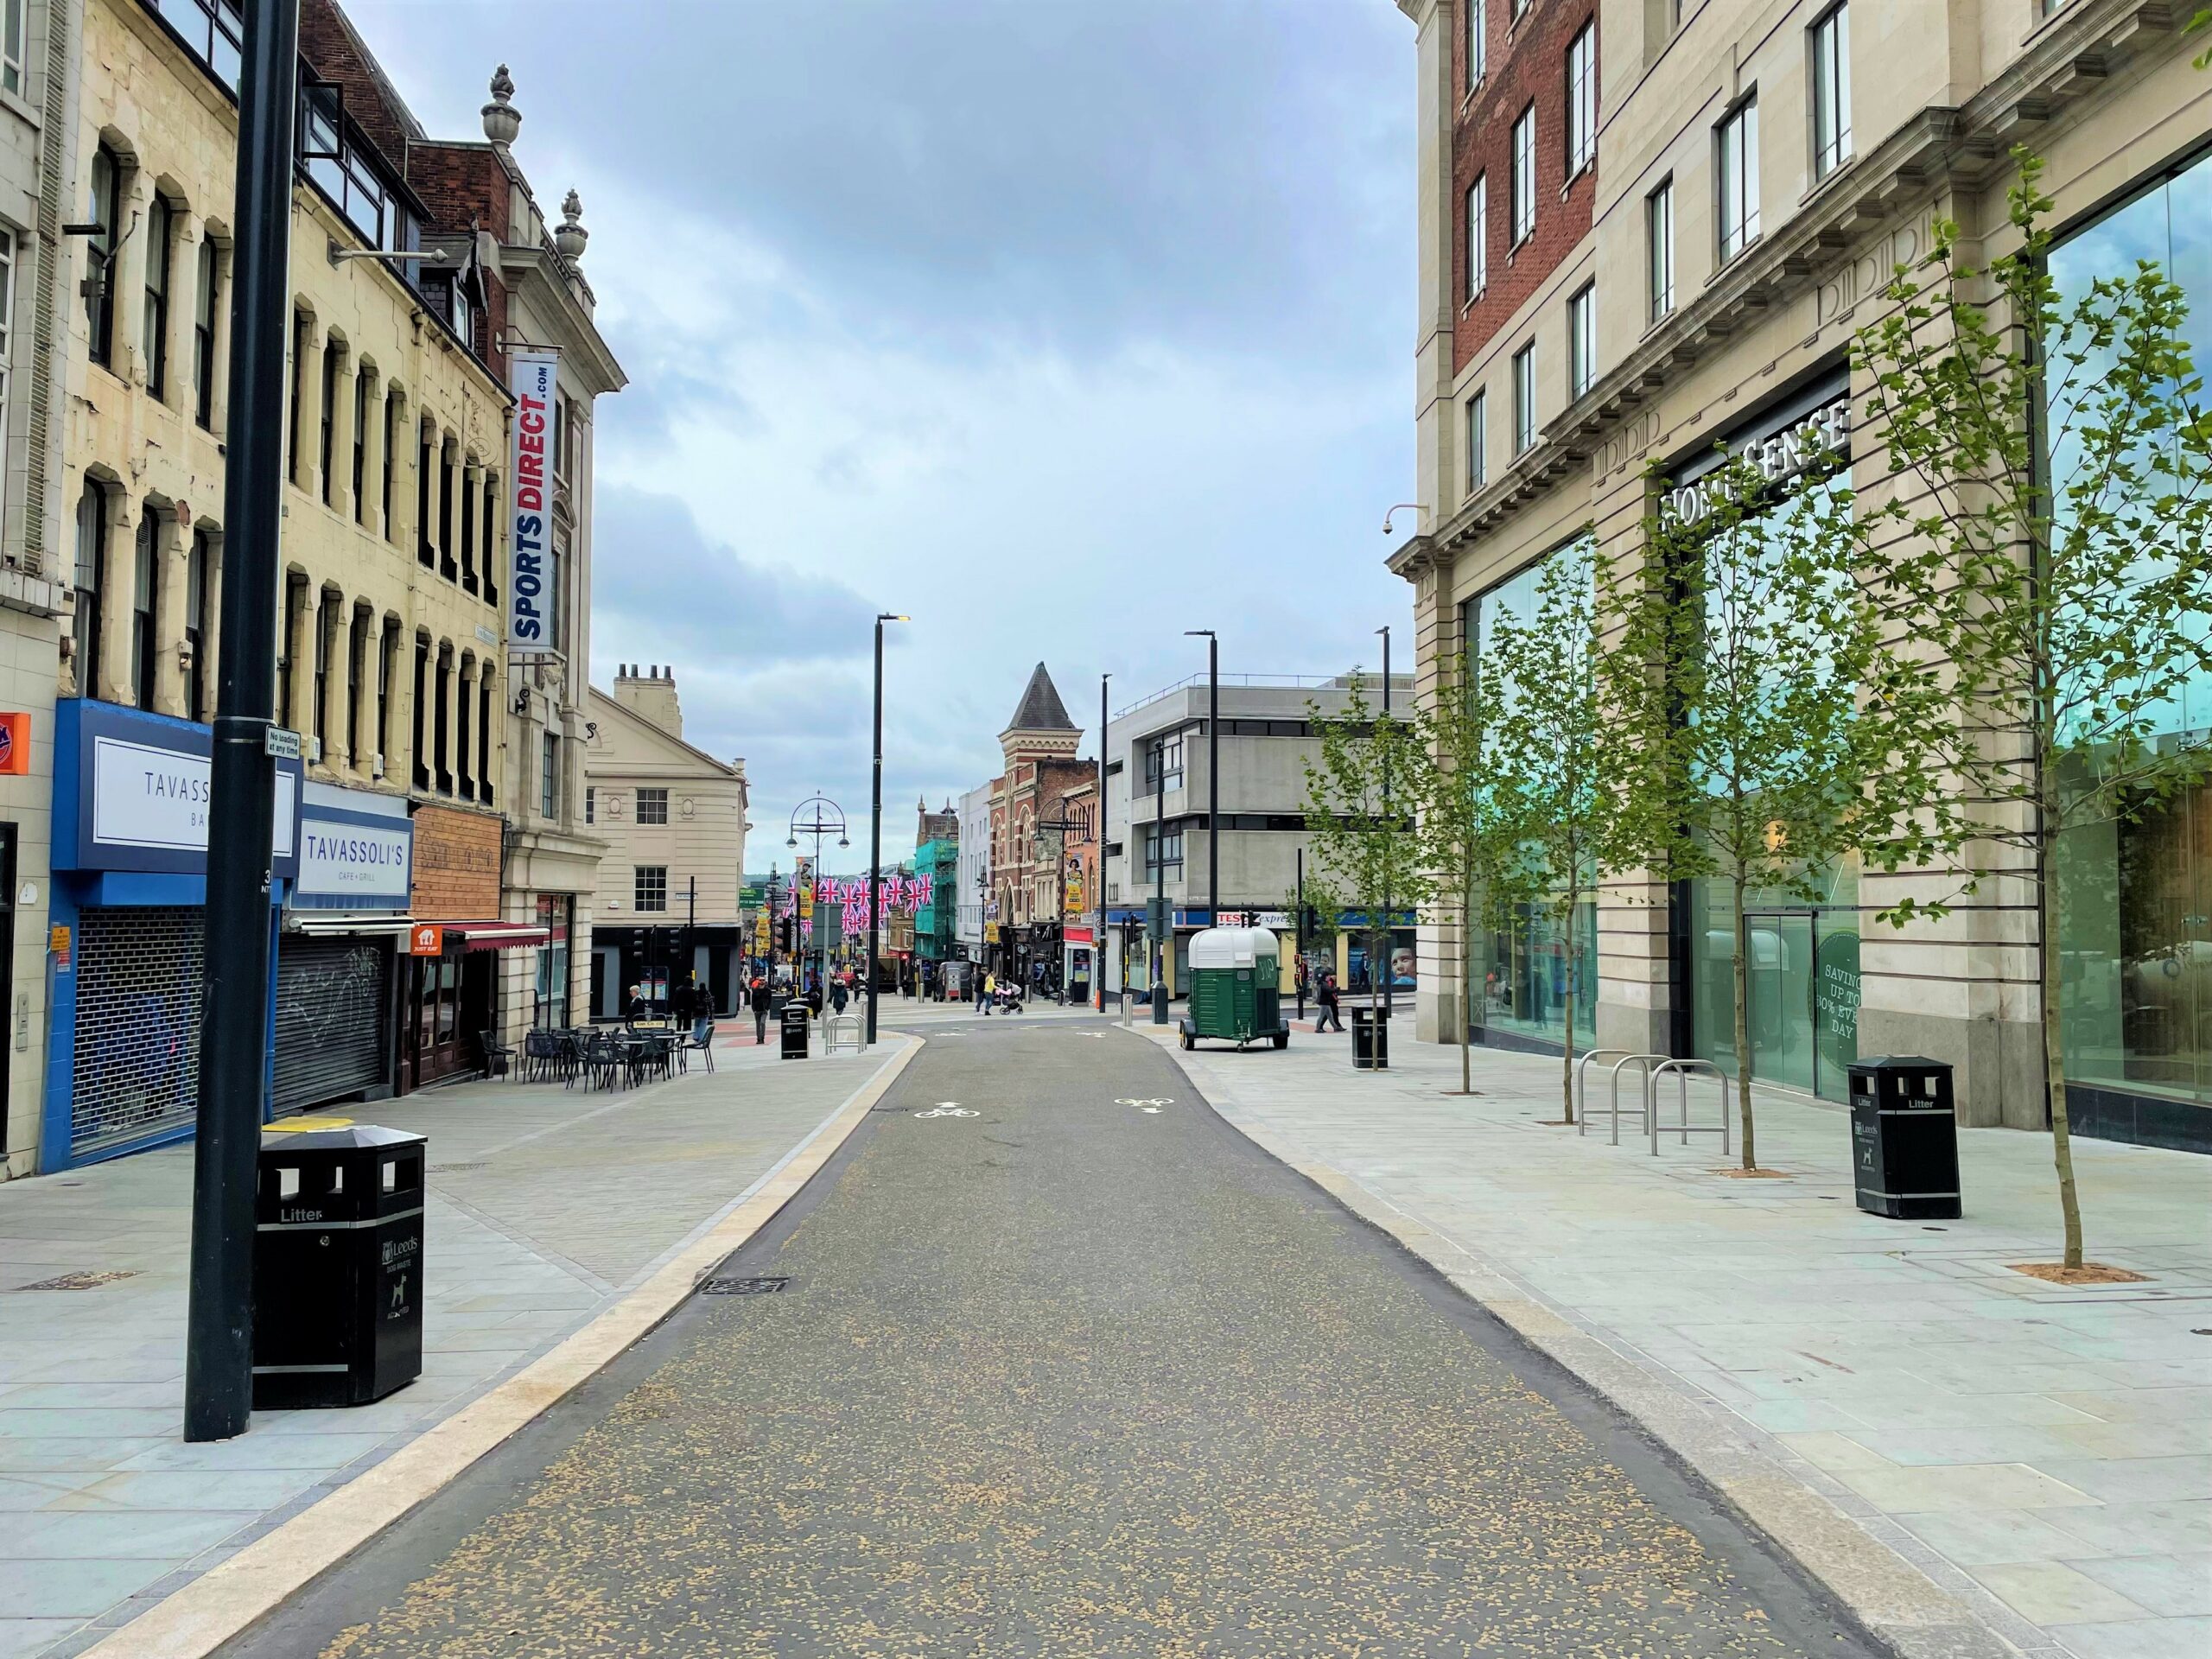 An image of the new work to transform New Briggate in Leeds city centre to allow better cycle lanes and public realm area